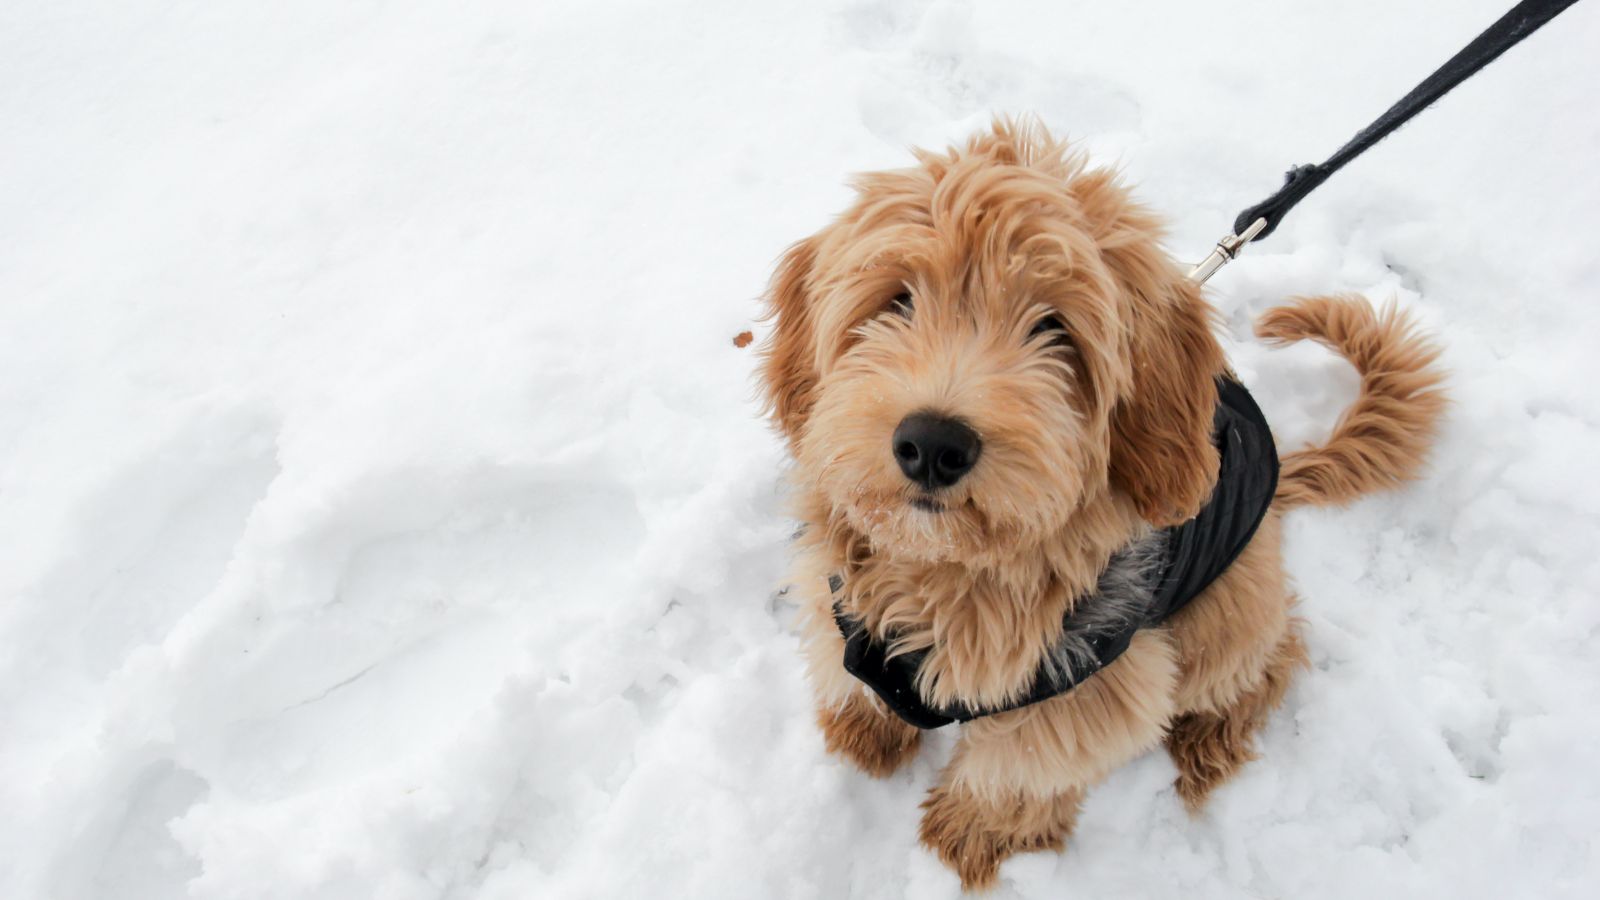 Goldendoodle on snowy days